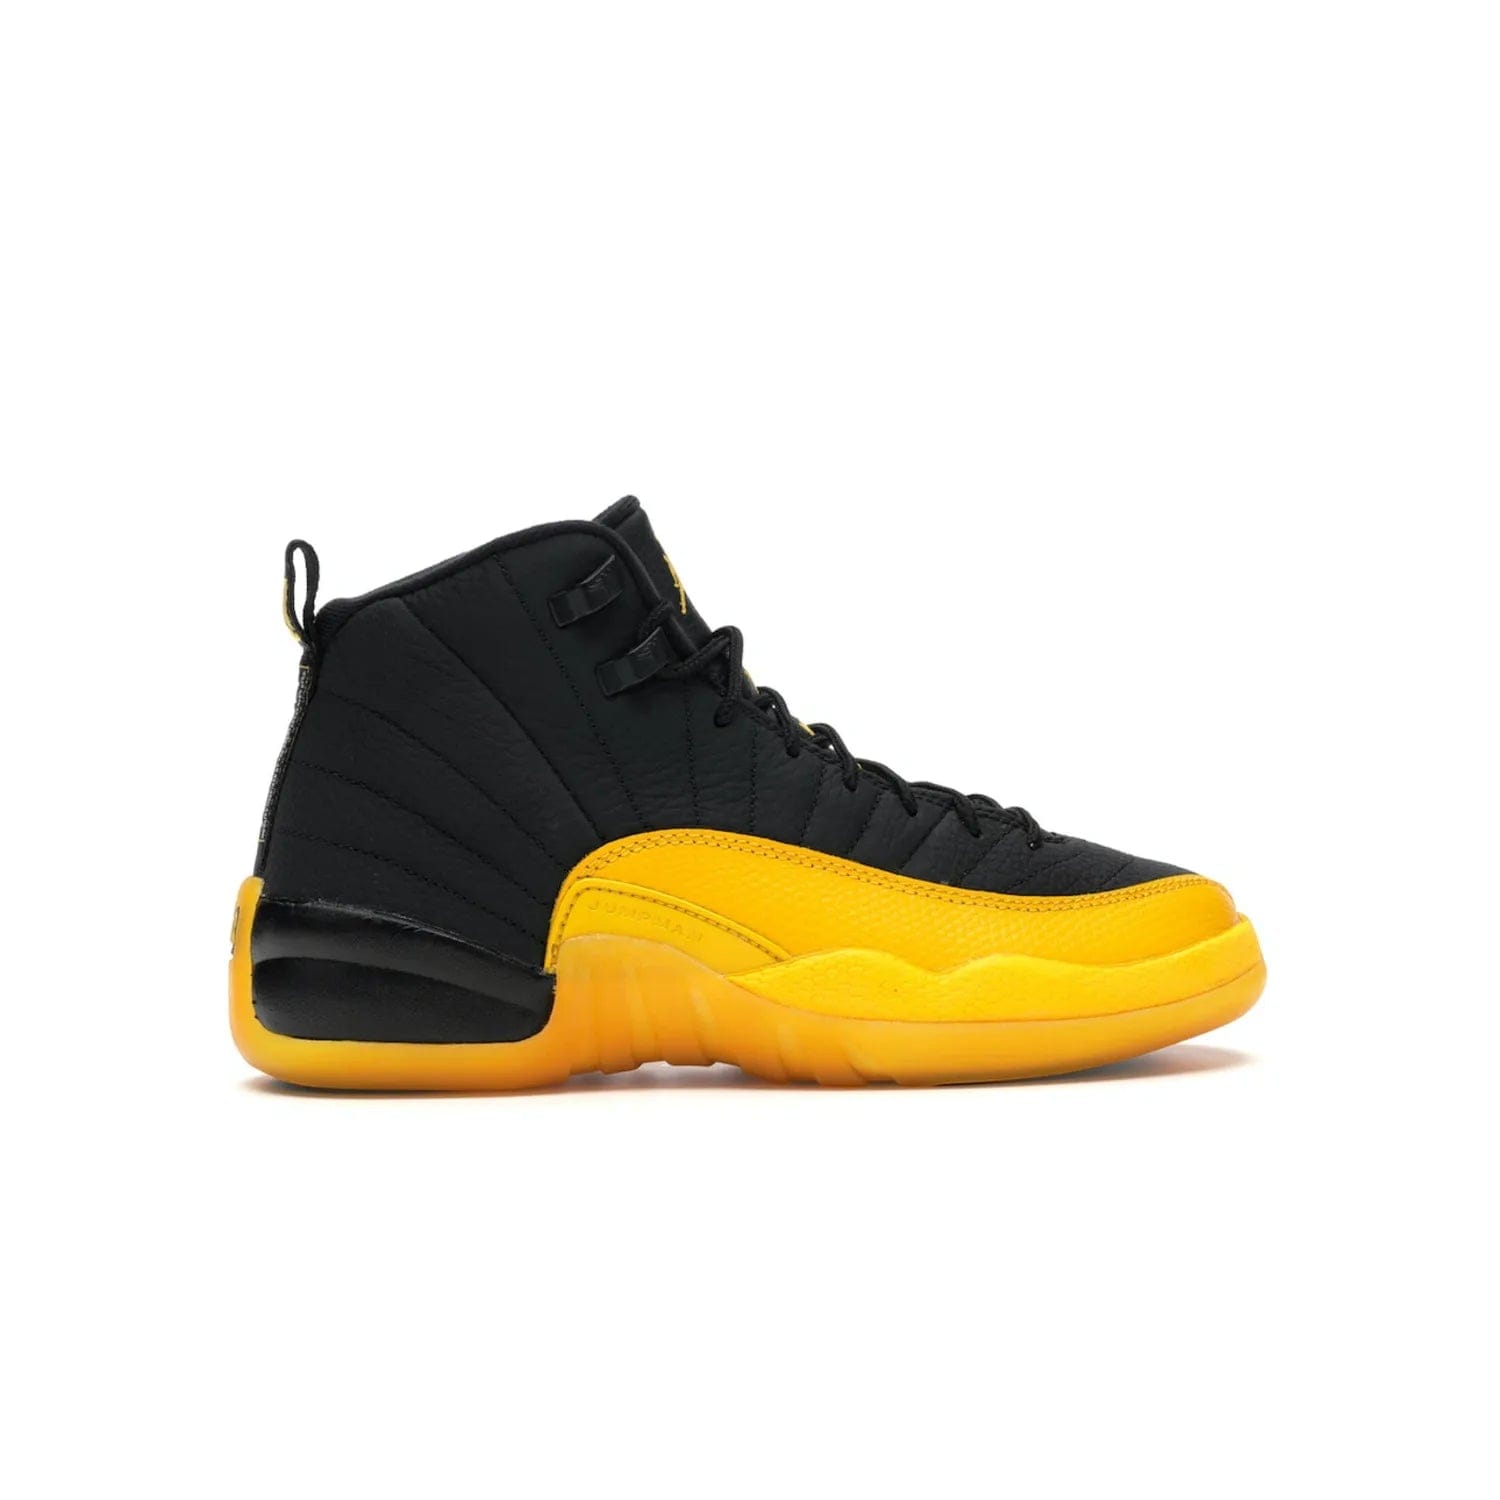 Jordan 12 Retro Black University Gold (GS) - Image 36 - Only at www.BallersClubKickz.com - Upgrade your kid's shoe collection with the Jordan 12 Retro Black University Gold. With classic style, black tumbled leather upper, and University Gold accents, it's a great summer look. Out July 2020.